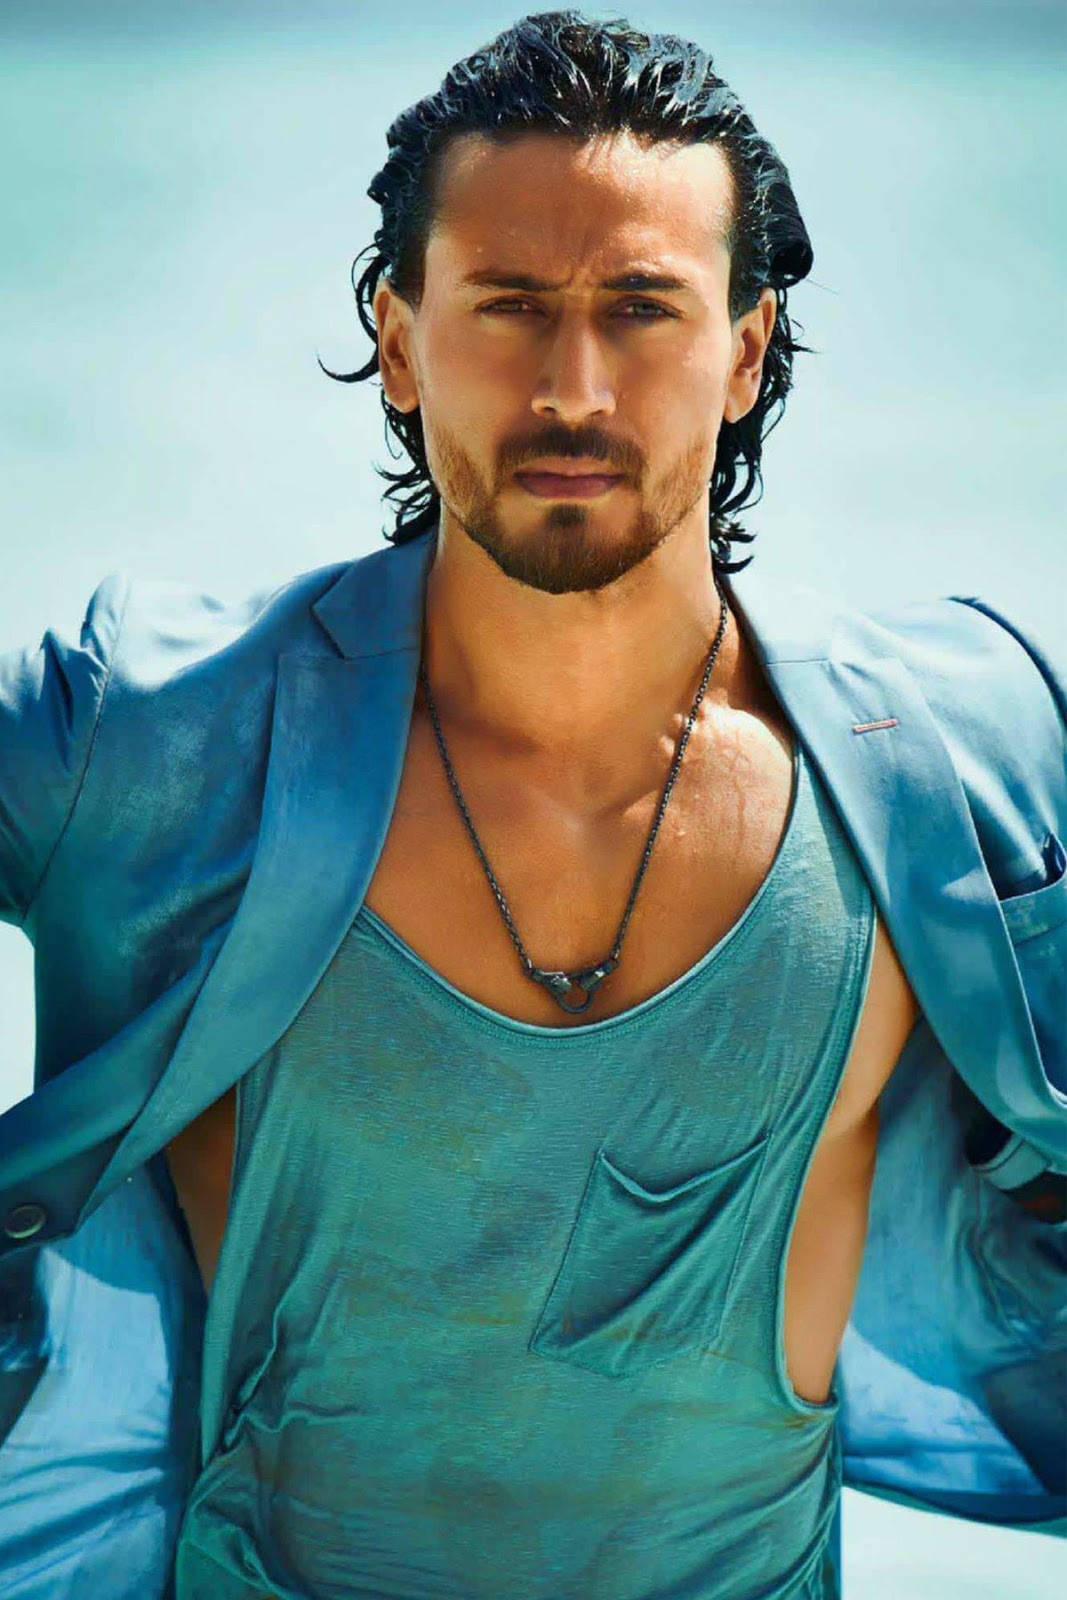 Tiger Shroff Body In Blue Outfit Wallpaper